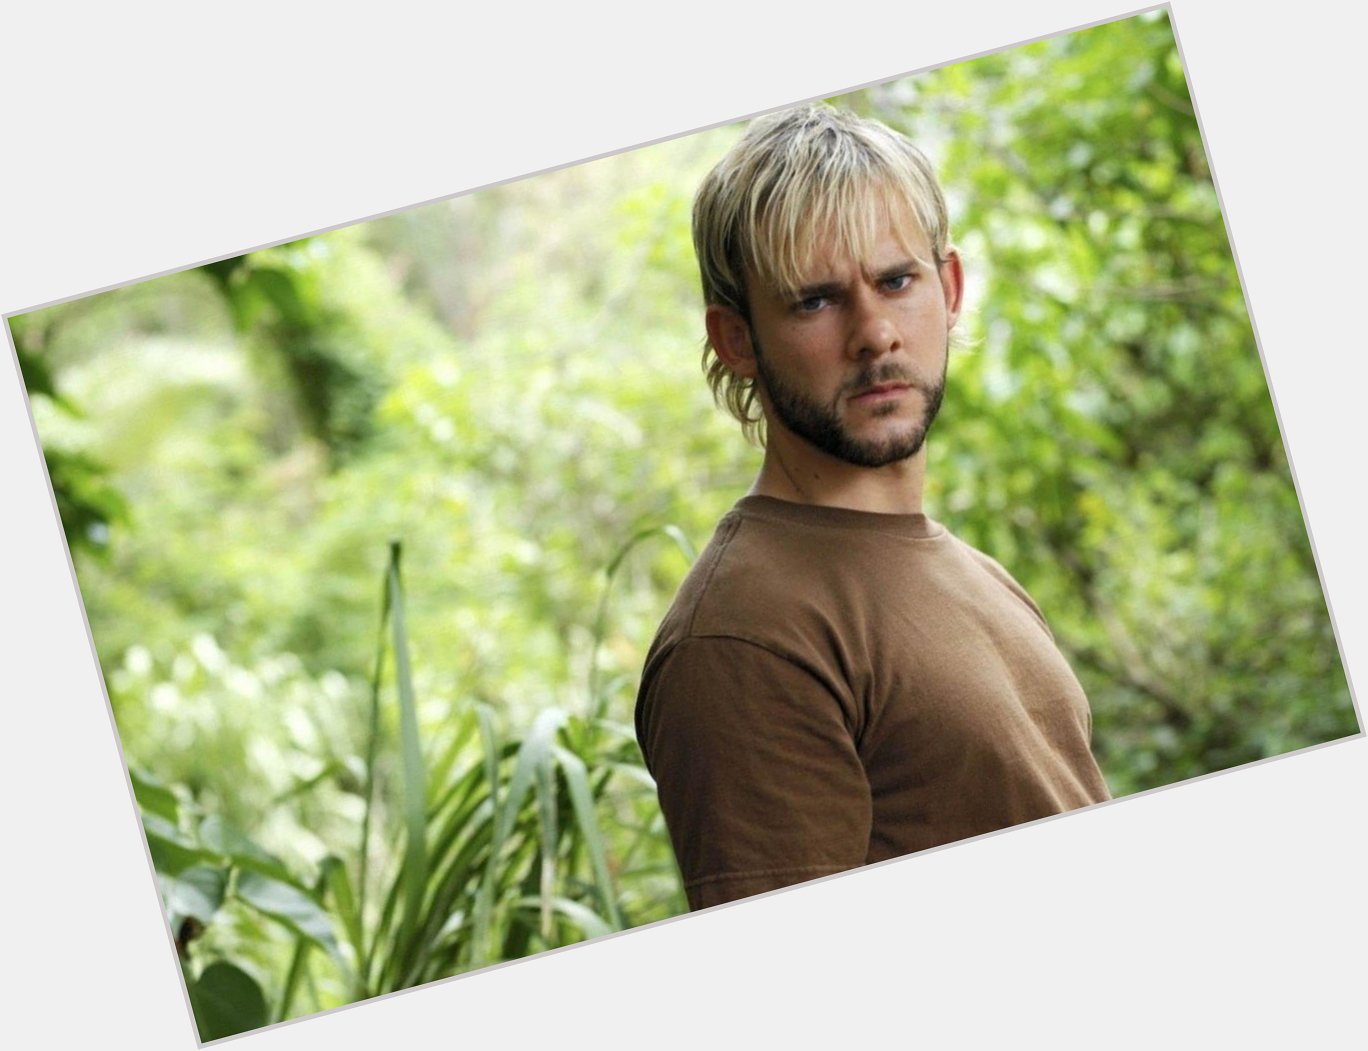 Also wishing a very happy birthday to Dominic Monaghan - Charlie on  